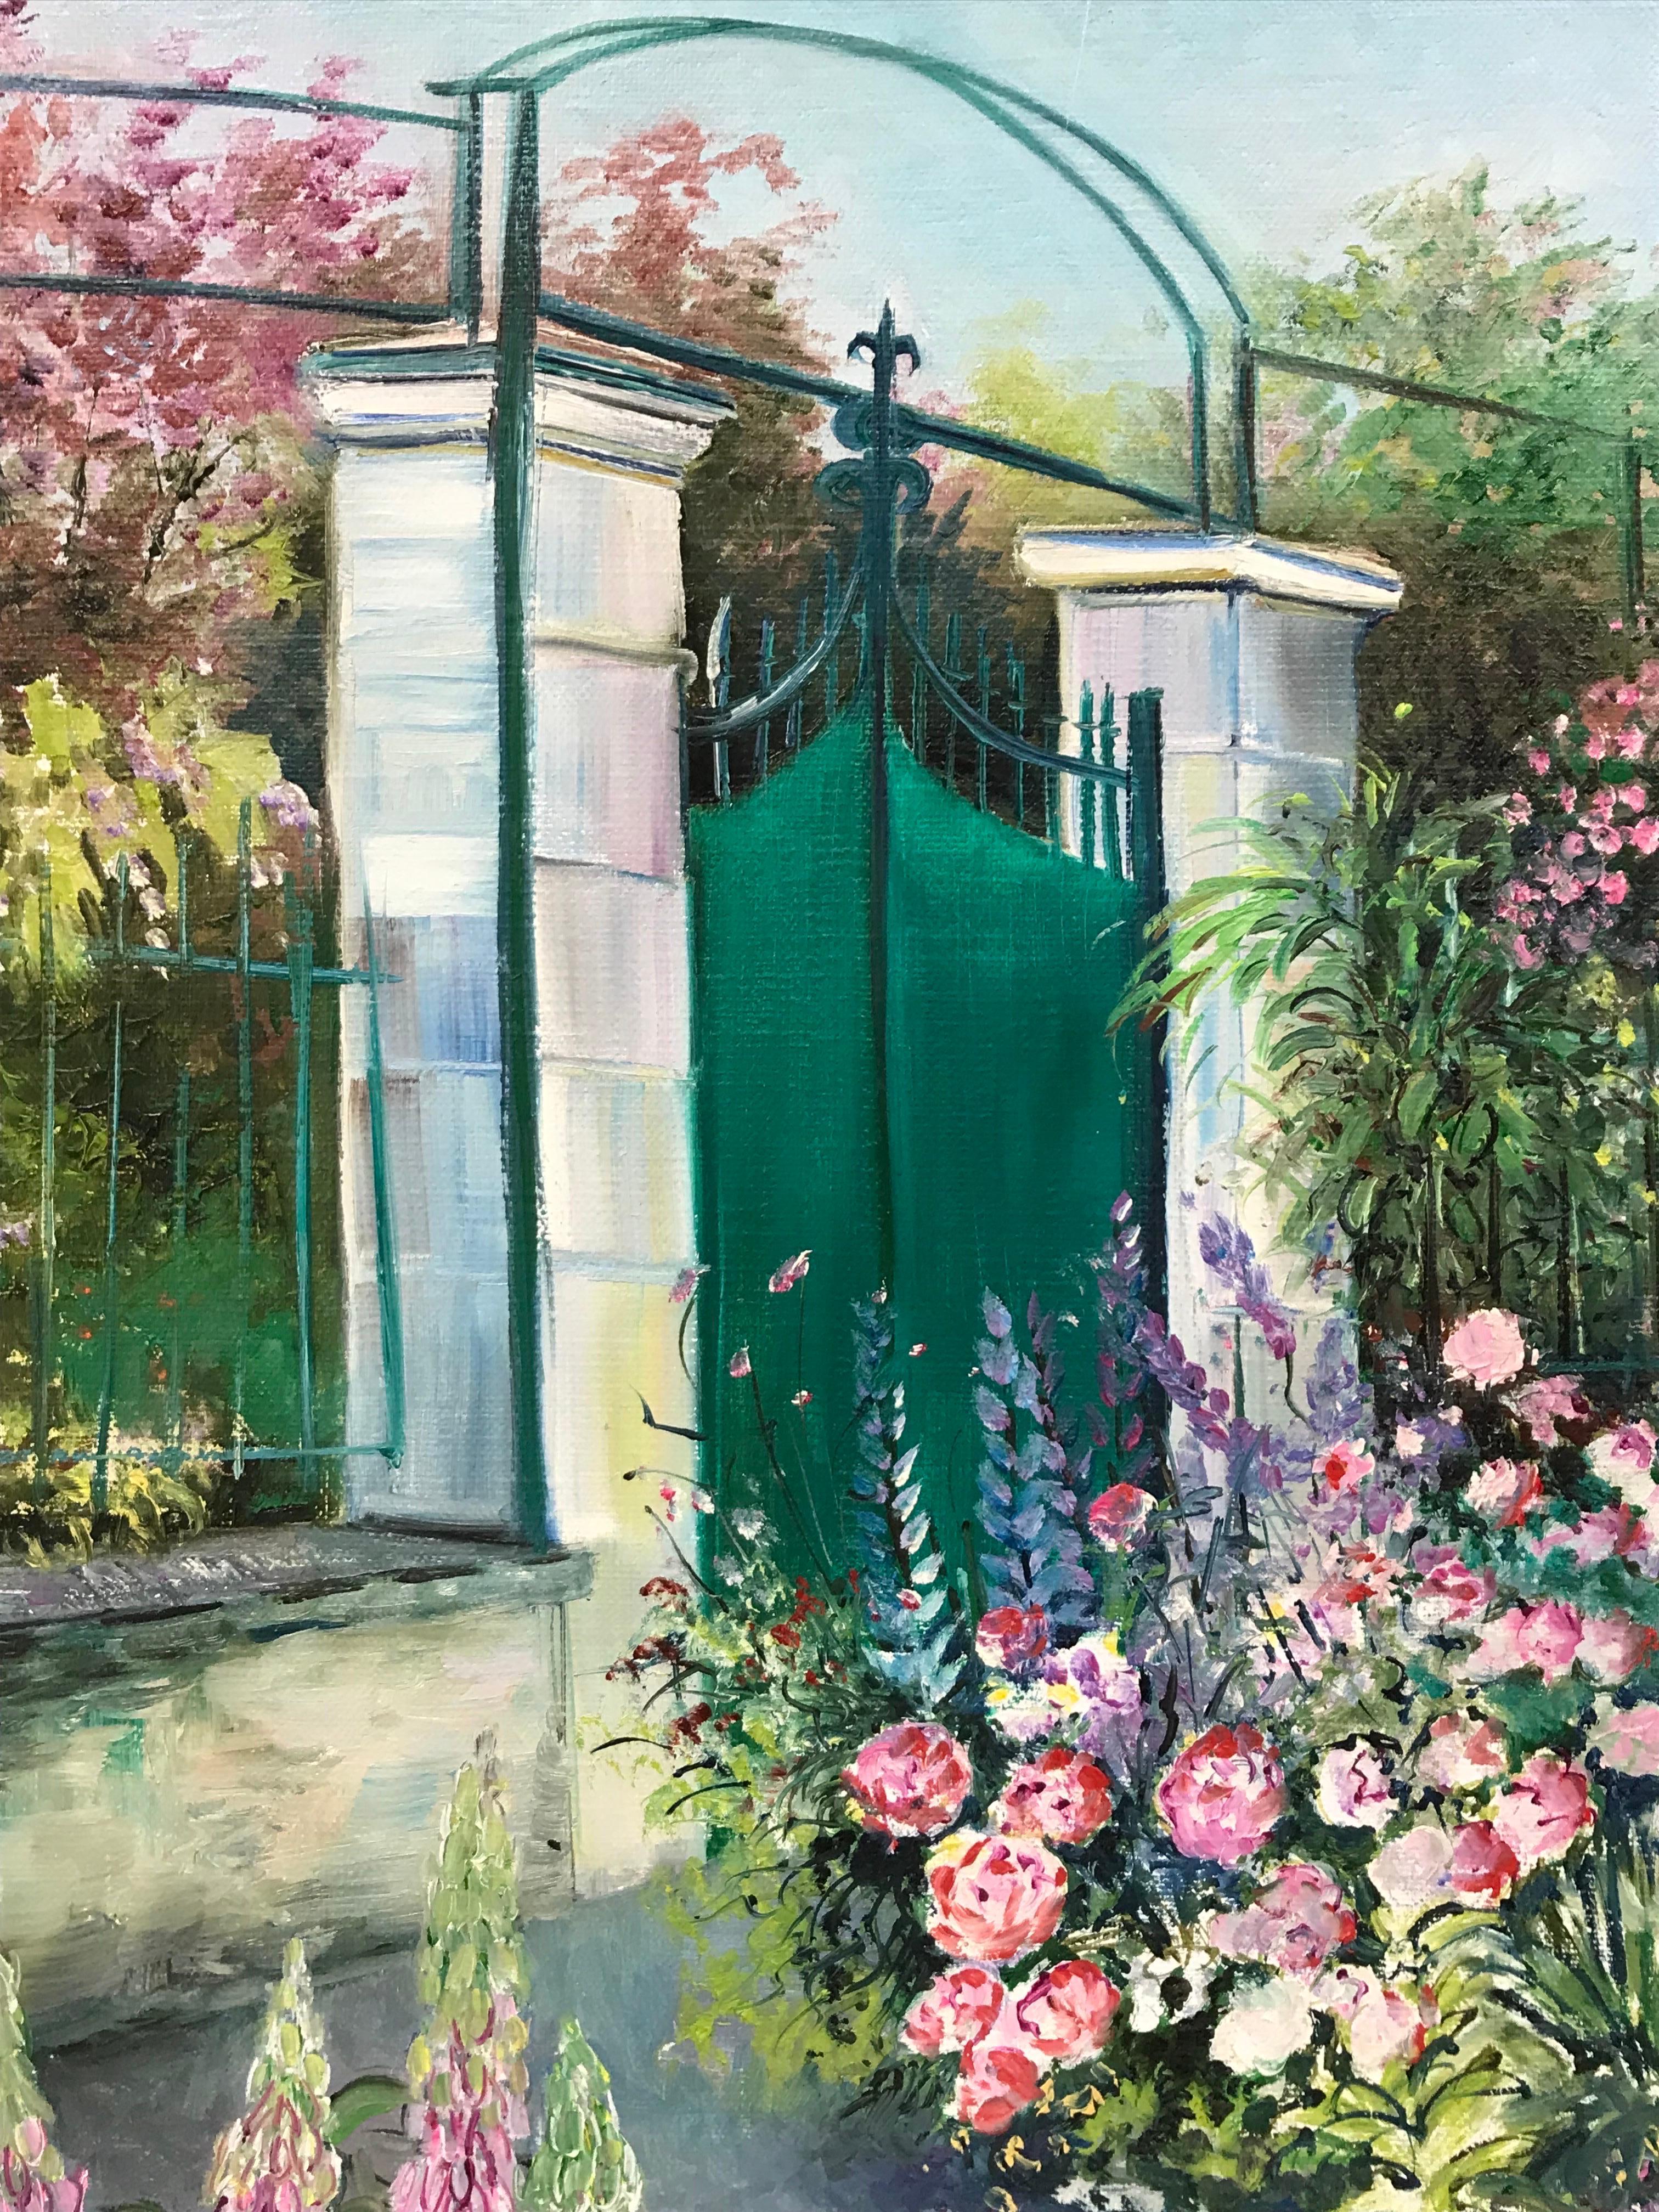 Artist/ School: B. Rigaudiere, signed front and back, French early 21st century

Title: 'La Grande Porte Giverny'

Medium: oil painting on canvas, unframed and inscribed verso

canvas : 18 x 15 inches

Provenance: private collection,